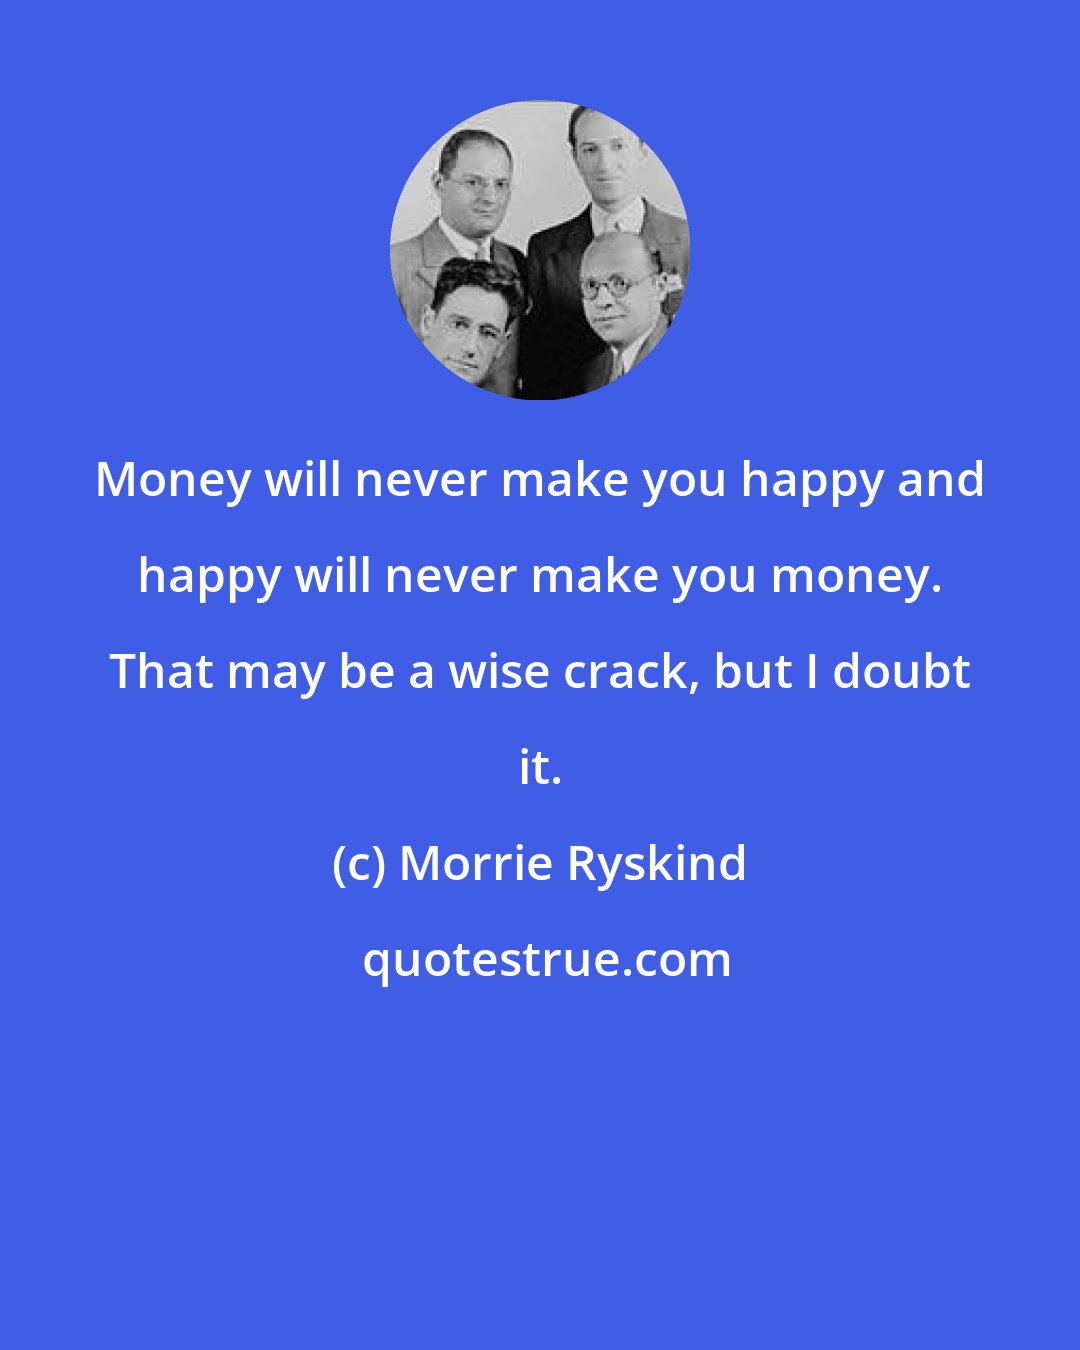 Morrie Ryskind: Money will never make you happy and happy will never make you money. That may be a wise crack, but I doubt it.